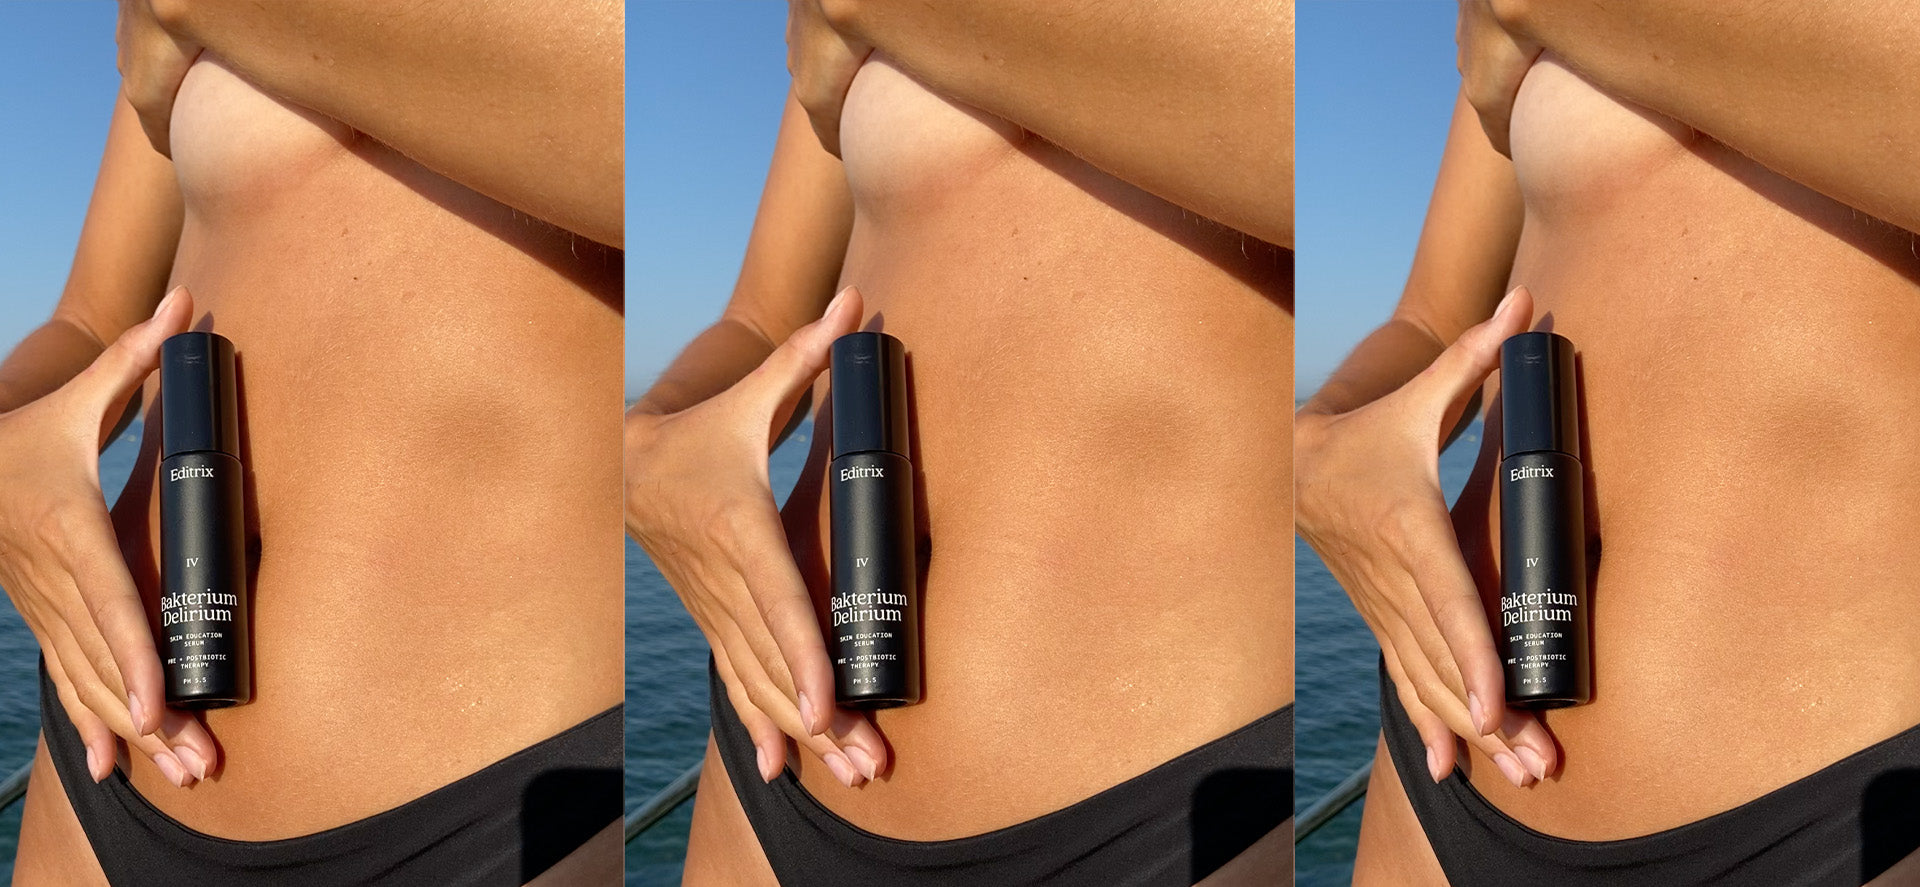 Image of a woman in a bikini holding a black skincare bottle of Editrix Bakterium Delirium against her stomach. She is wearing a black bikini and the photo is zoomed in to see the product.